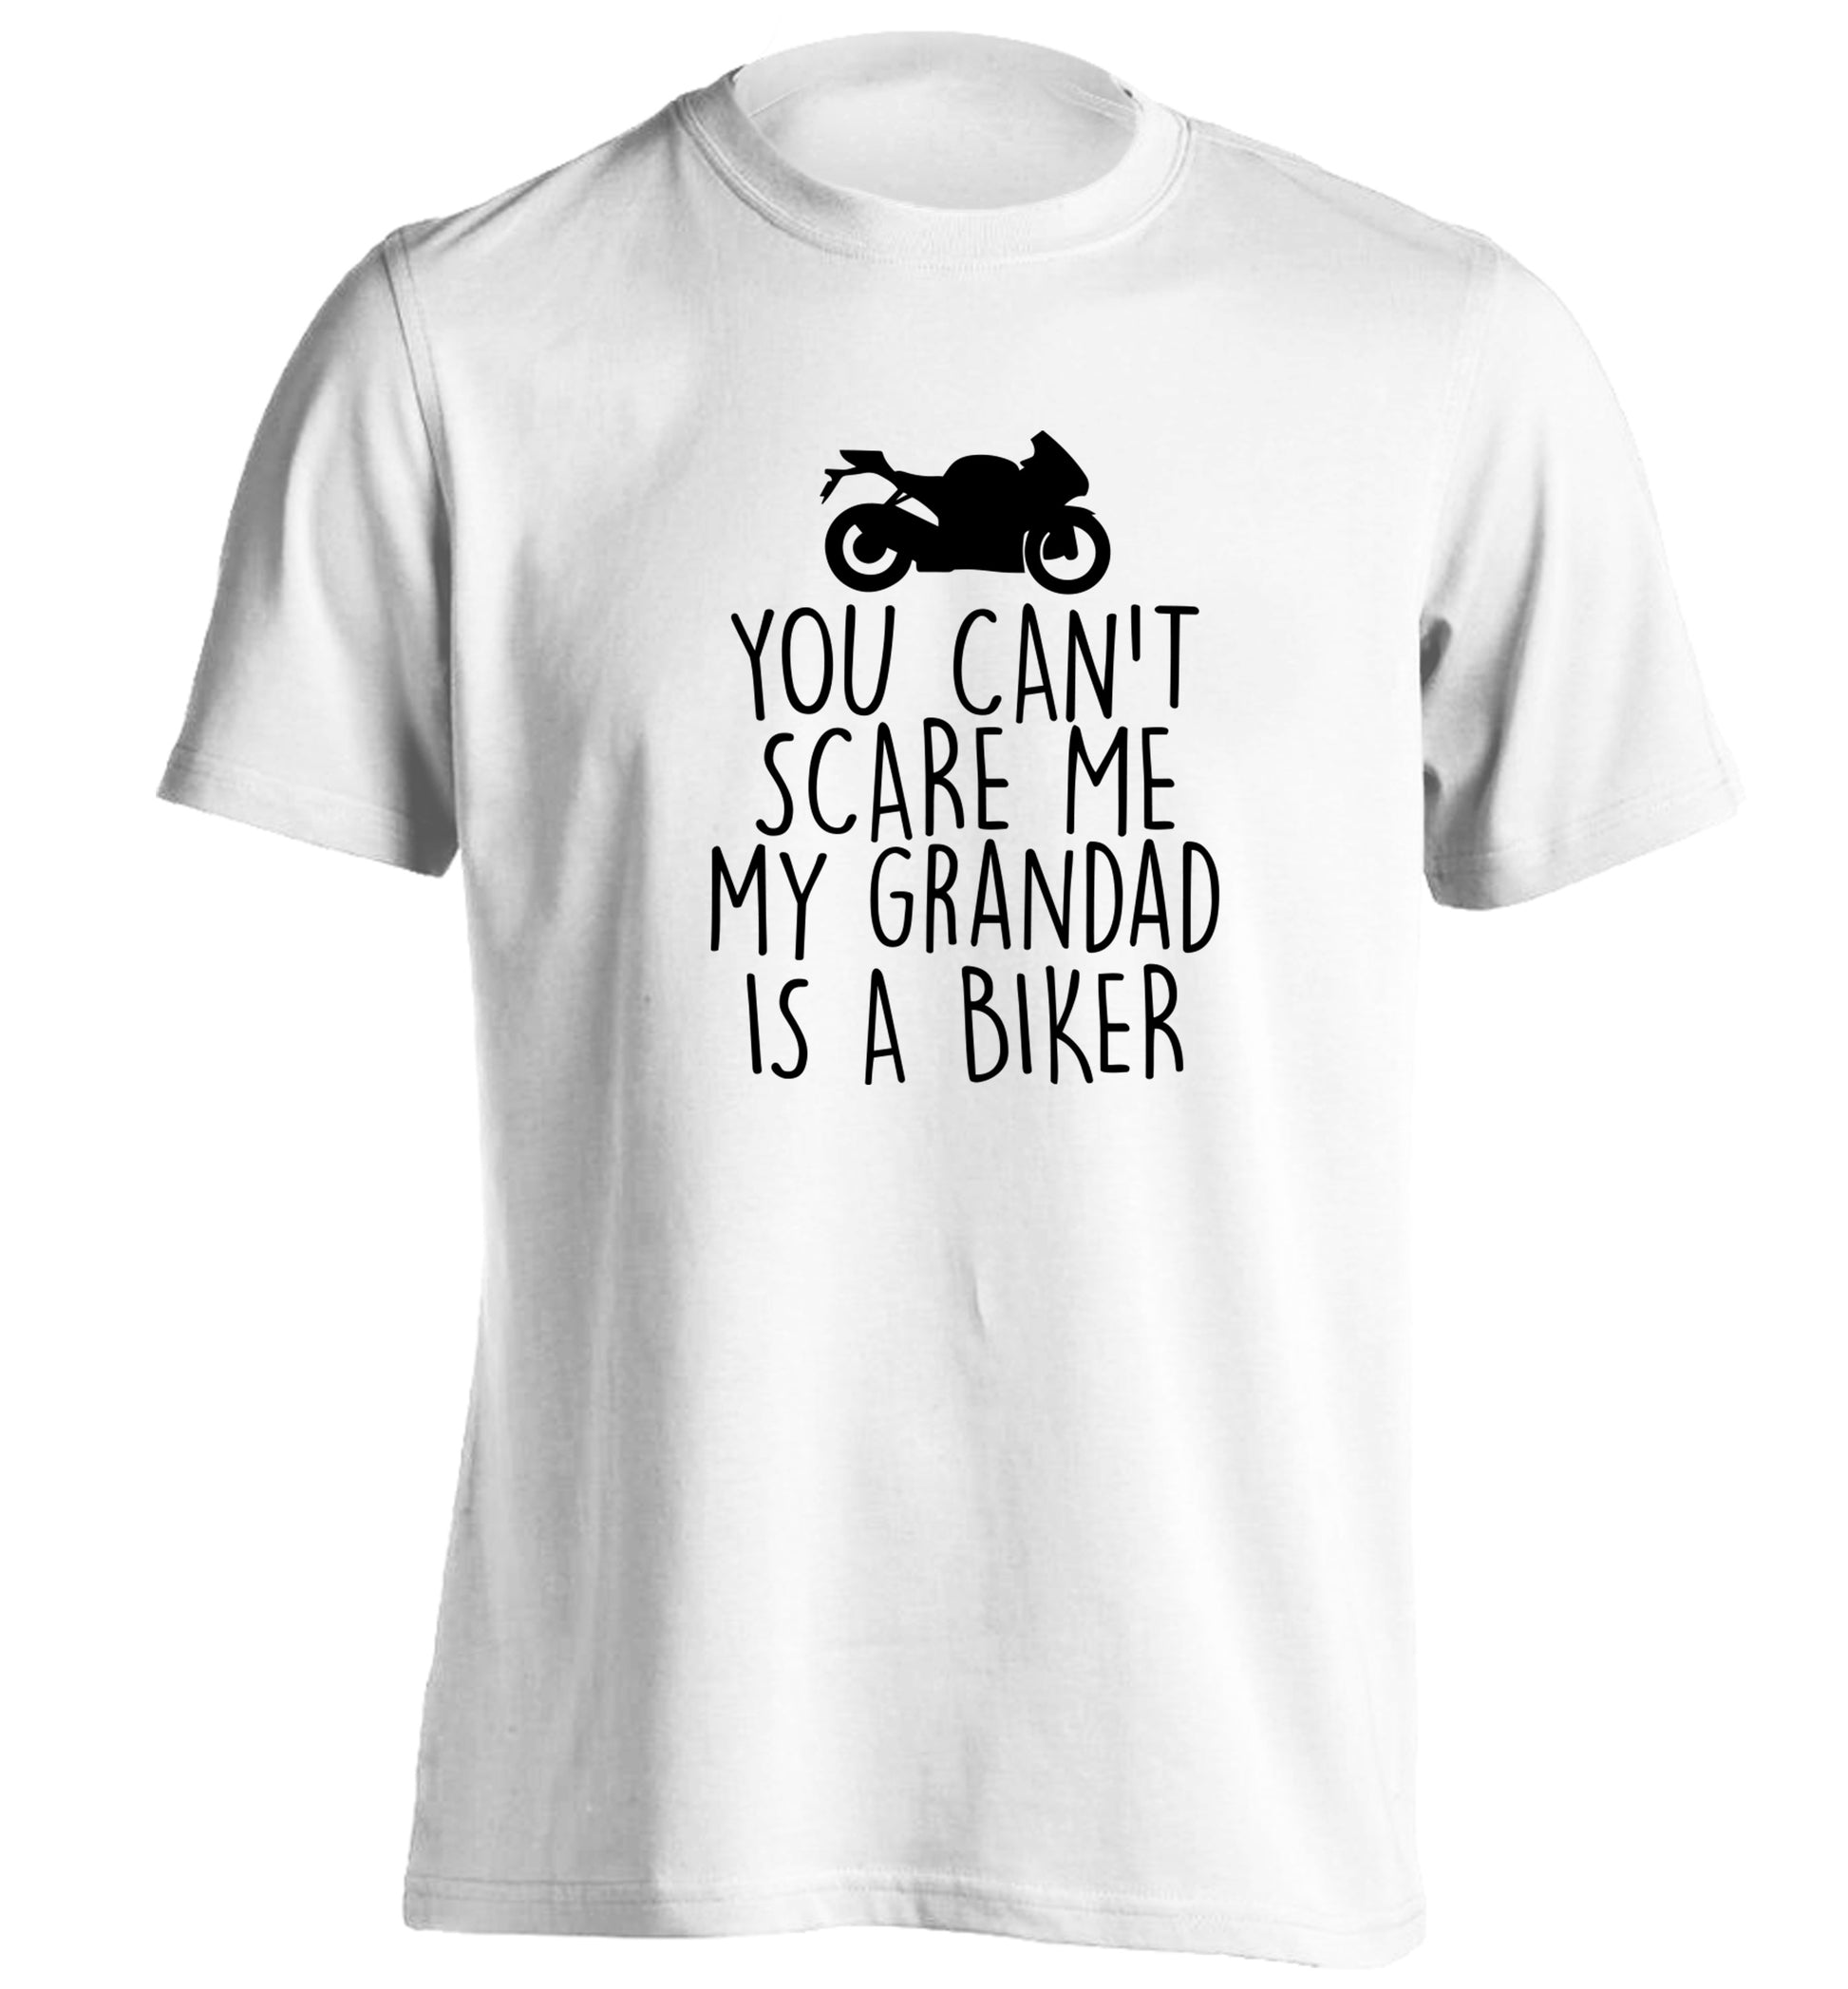 You can't scare me my grandad is a biker adults unisex white Tshirt 2XL